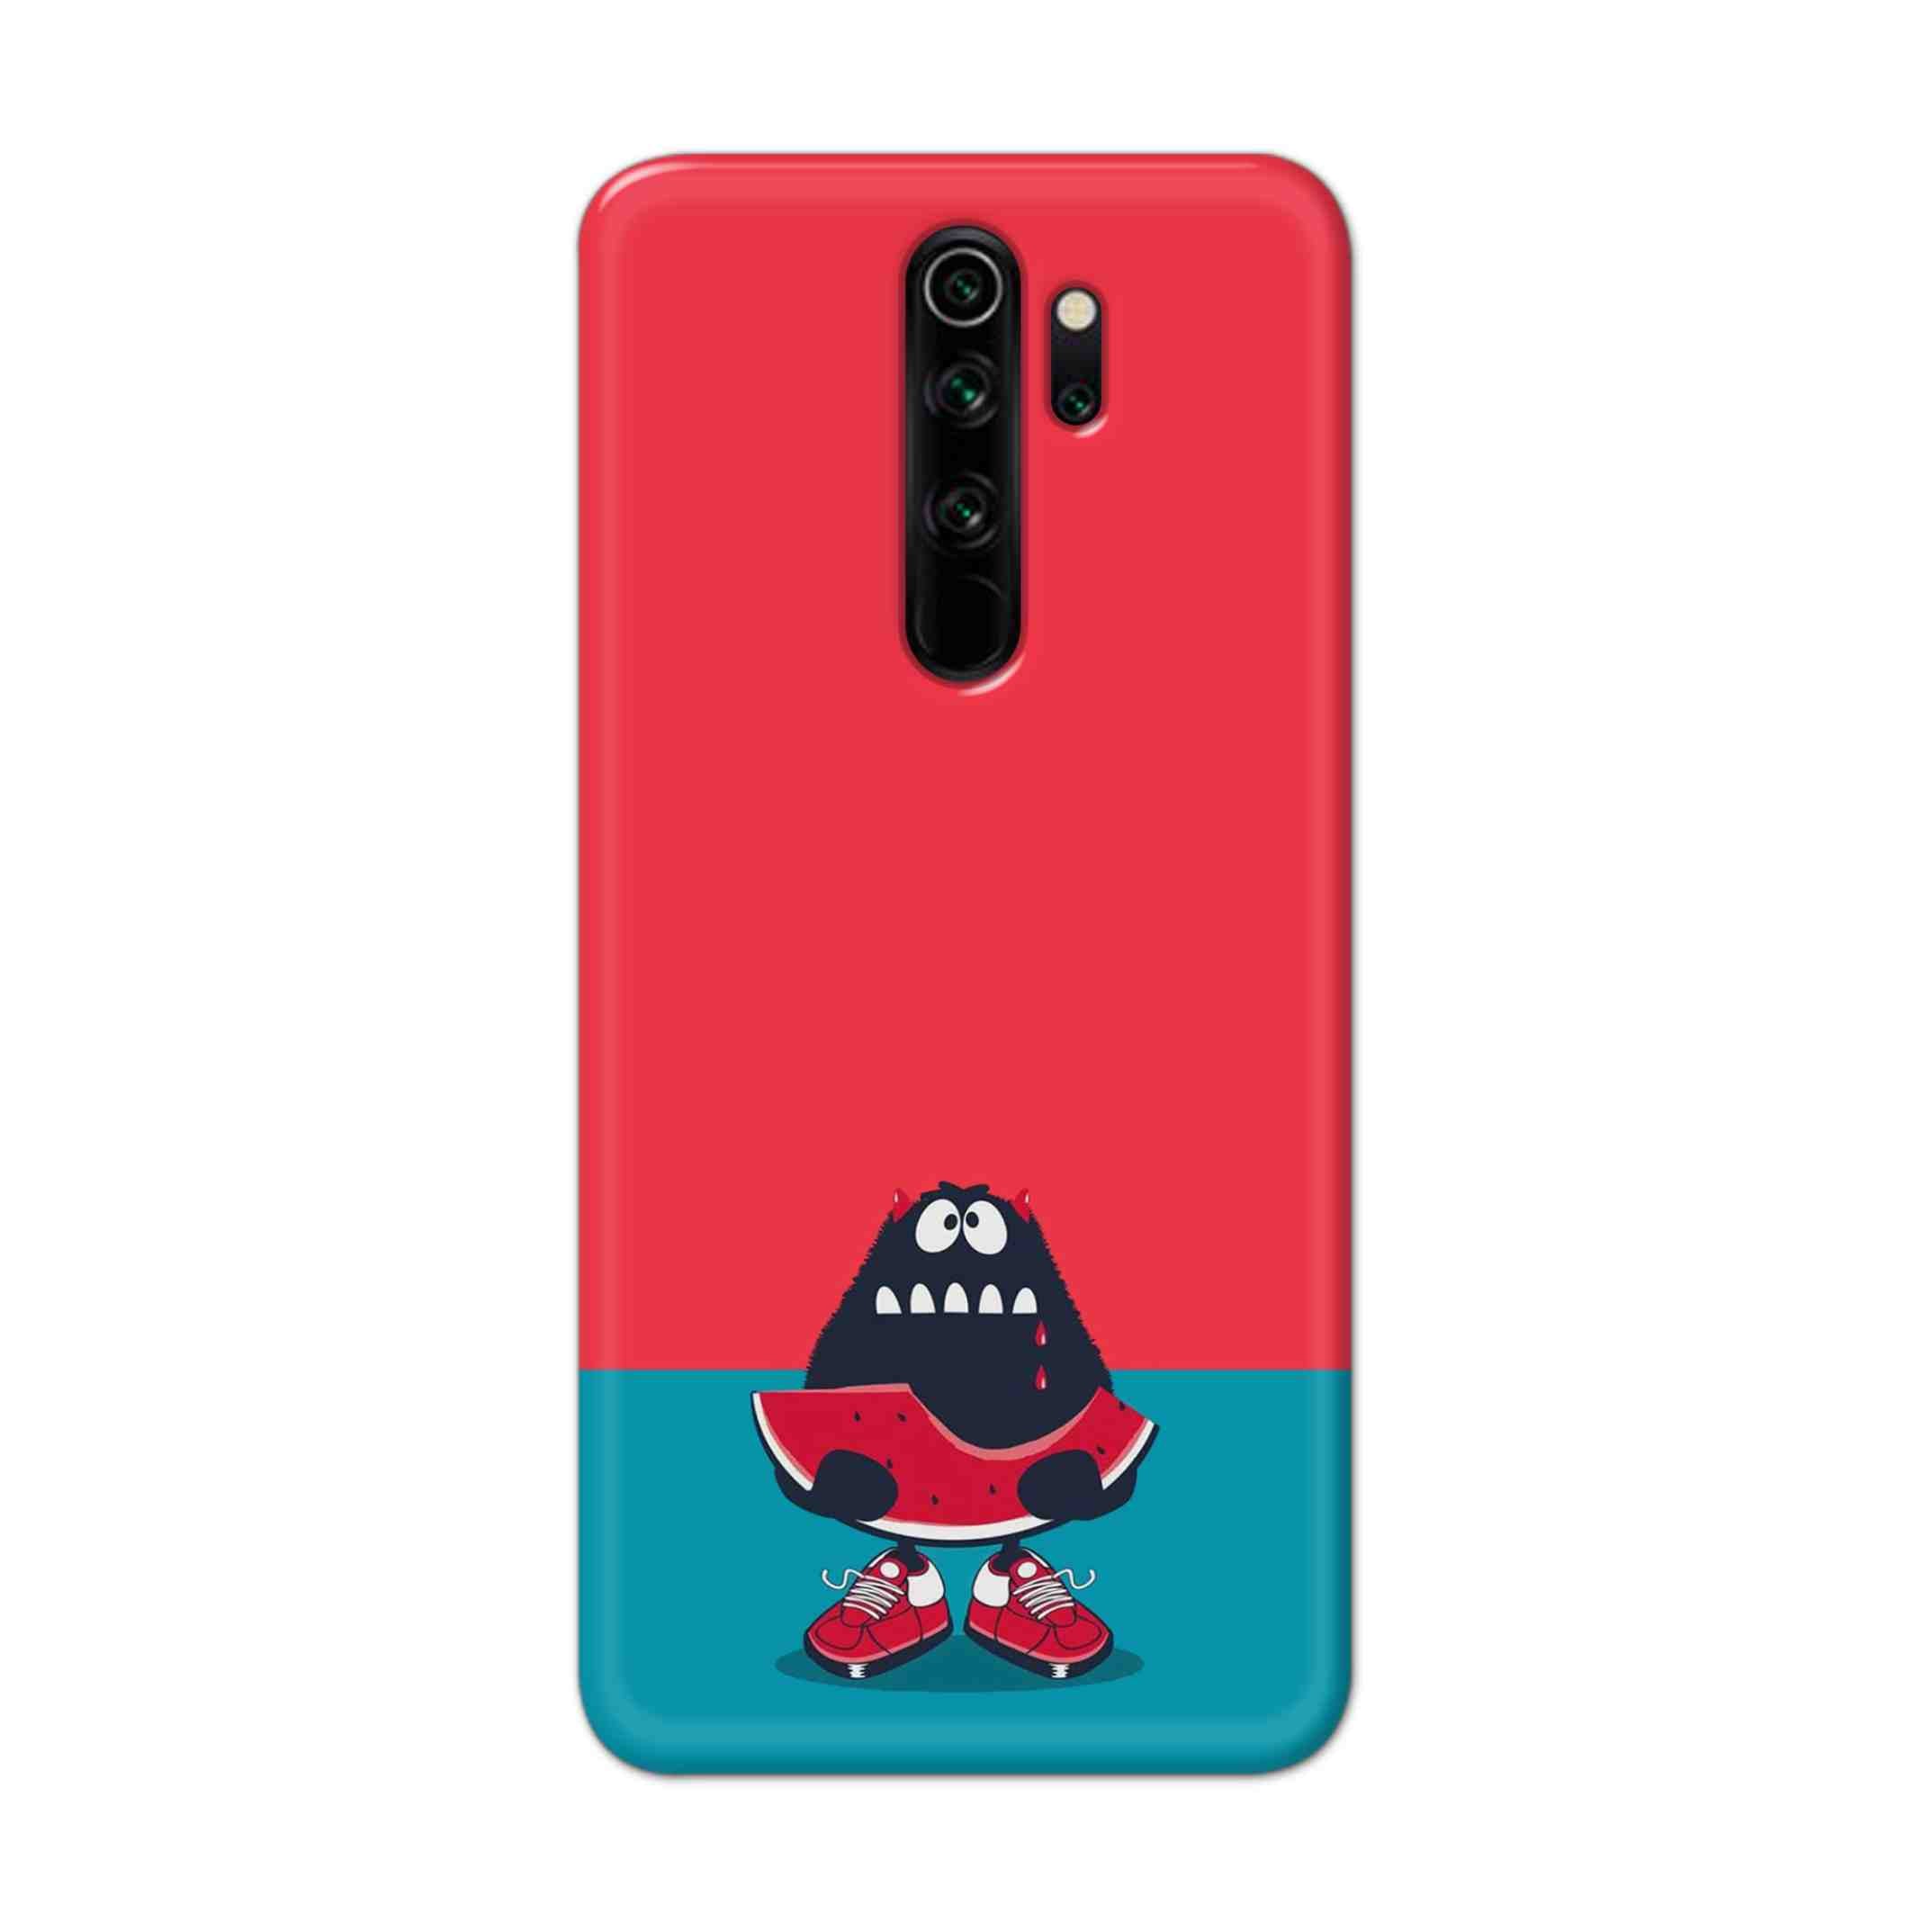 Buy Watermelon Hard Back Mobile Phone Case Cover For Xiaomi Redmi Note 8 Pro Online